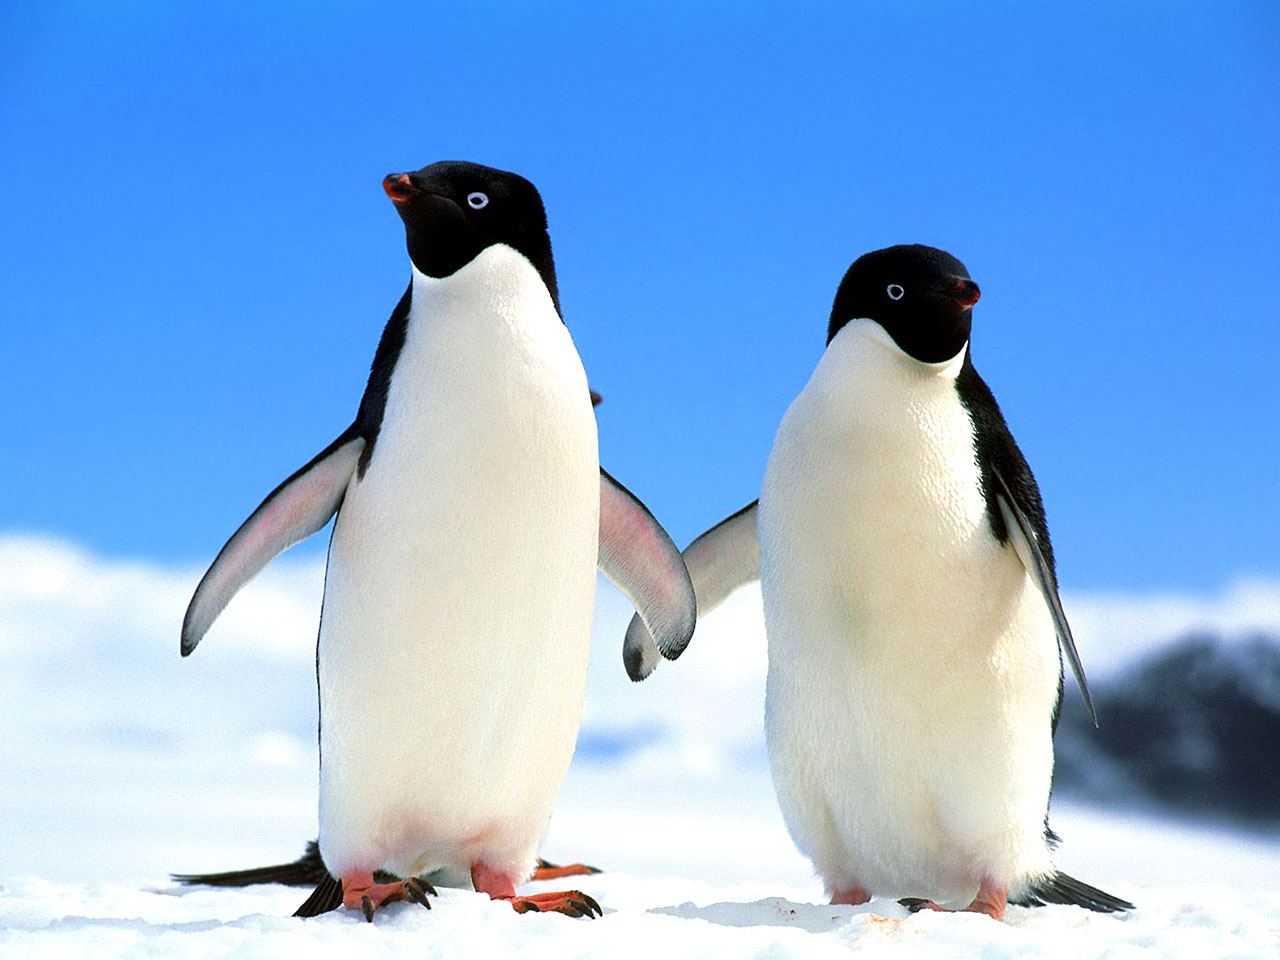 Cute Penguins | Cute Mighty Pictures
 Cute Winter Penguin Wallpaper